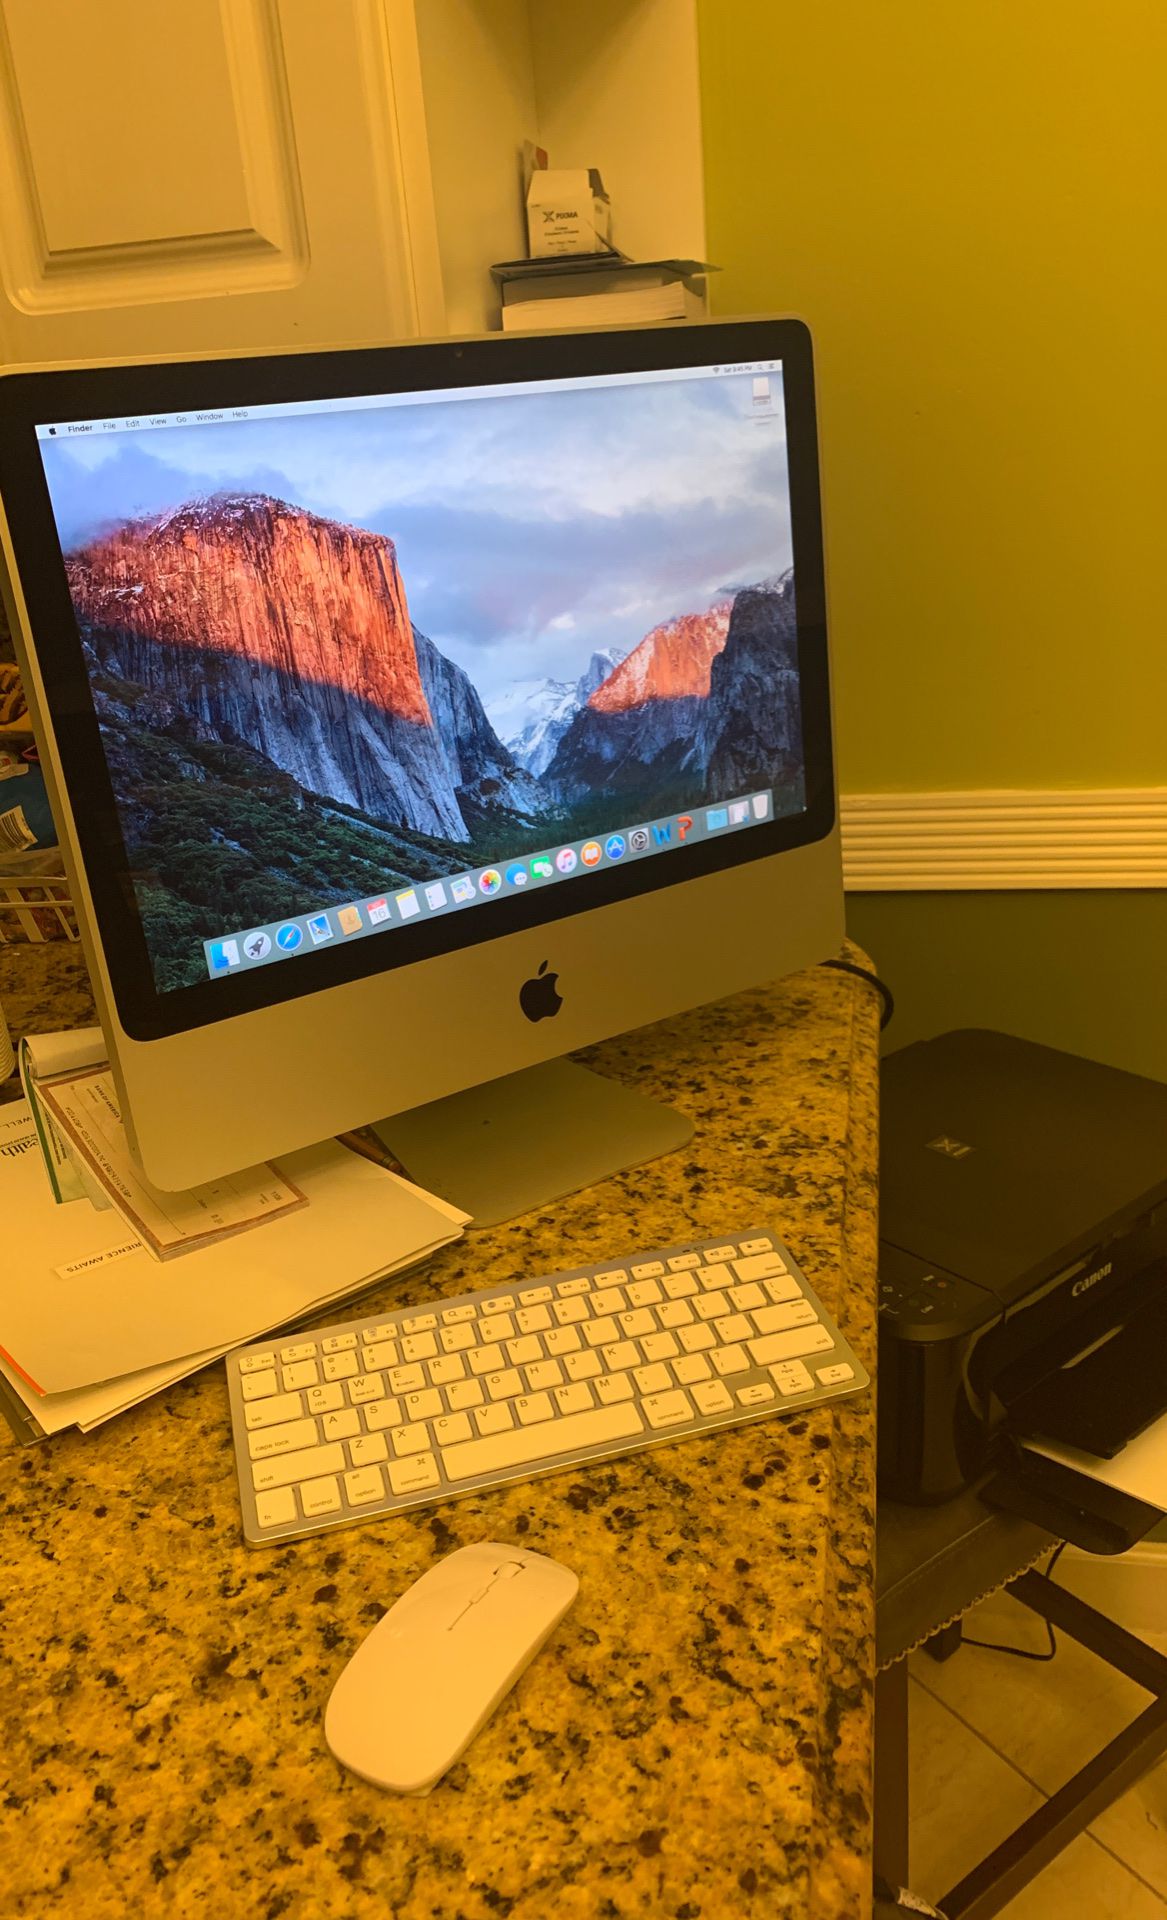 Apple computer in good condition with keyboard and mouse